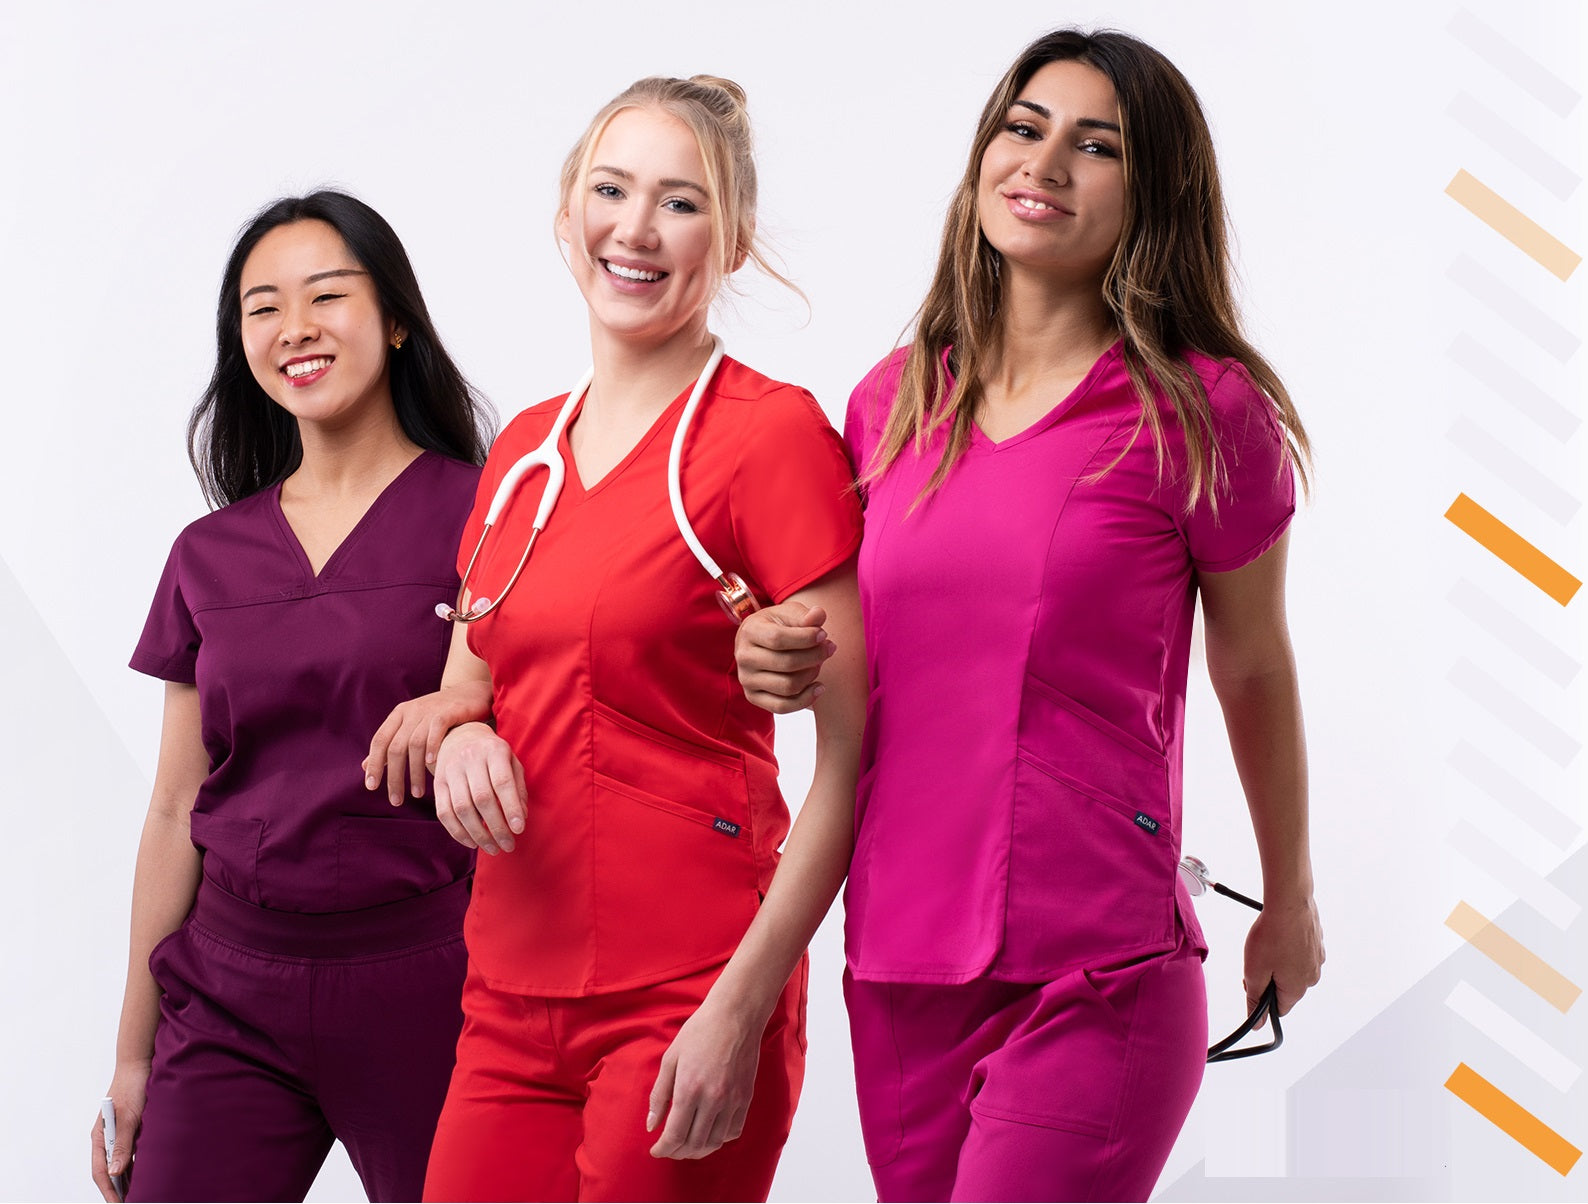 fashionable medical scrubs and uniforms